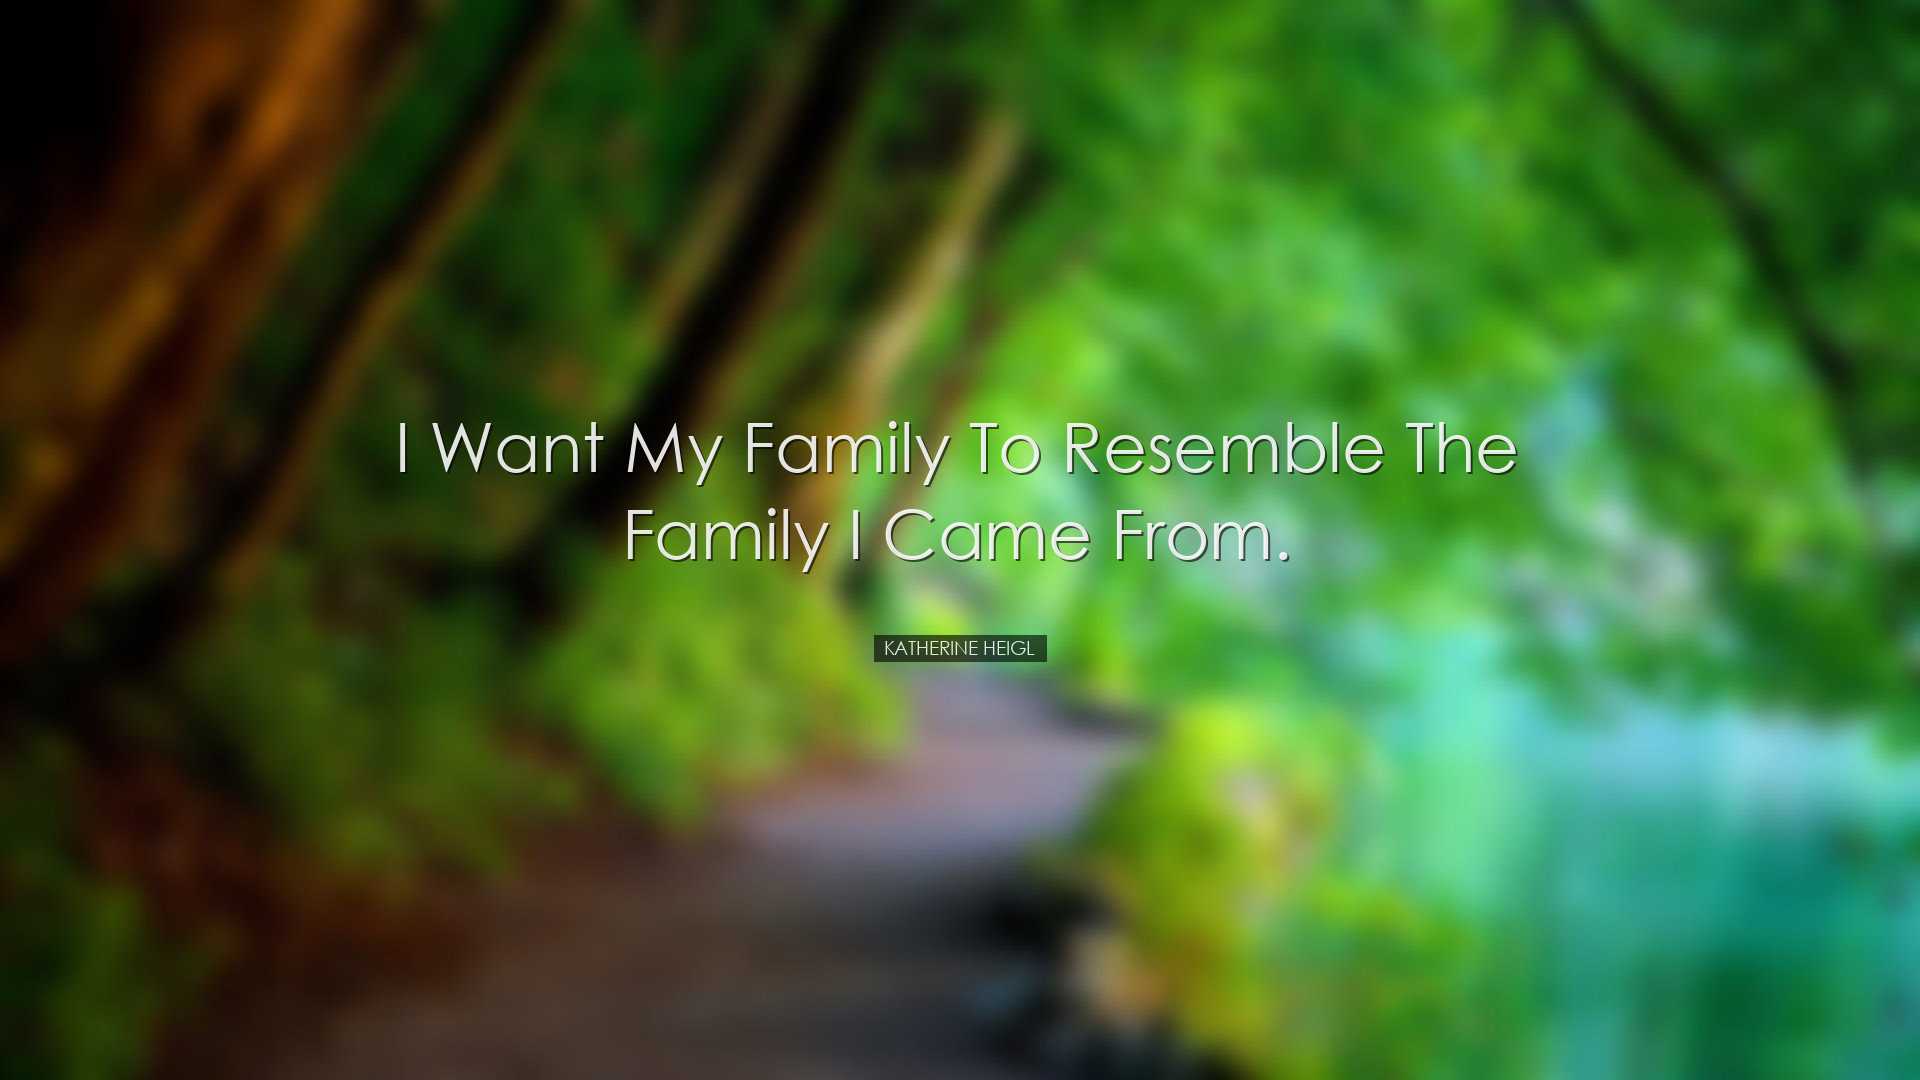 I want my family to resemble the family I came from. - Katherine H